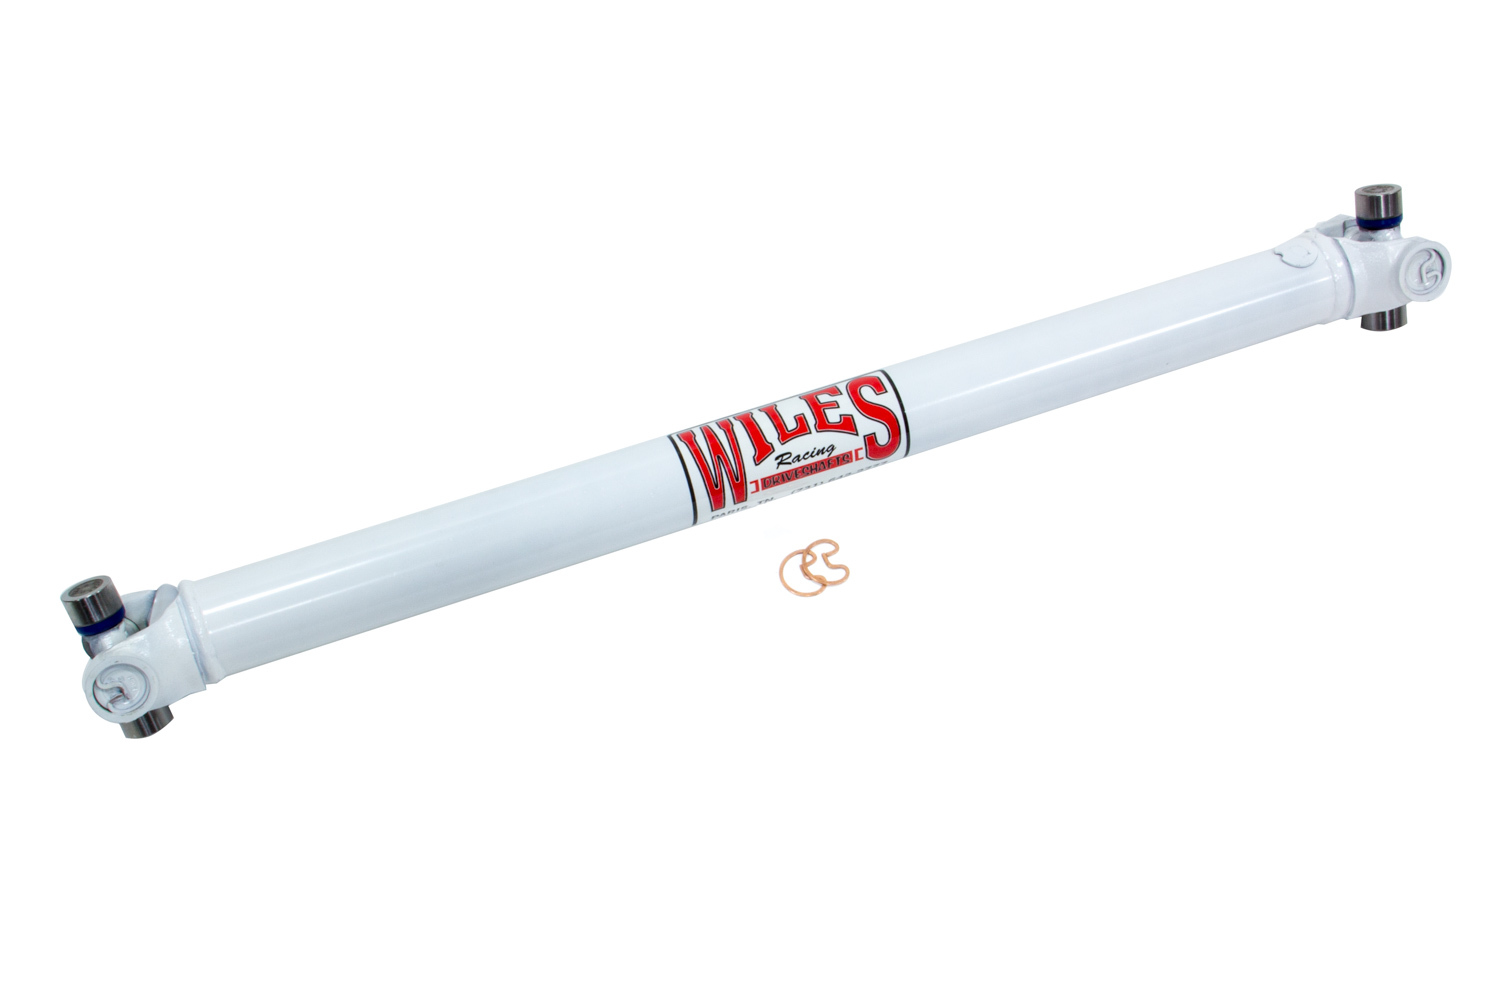 Wiles Driveshaft S295385 Drive Shaft, 38.500 in Long, 2 in OD, 1310 U-Joints, Steel, White Paint, Universal, Each